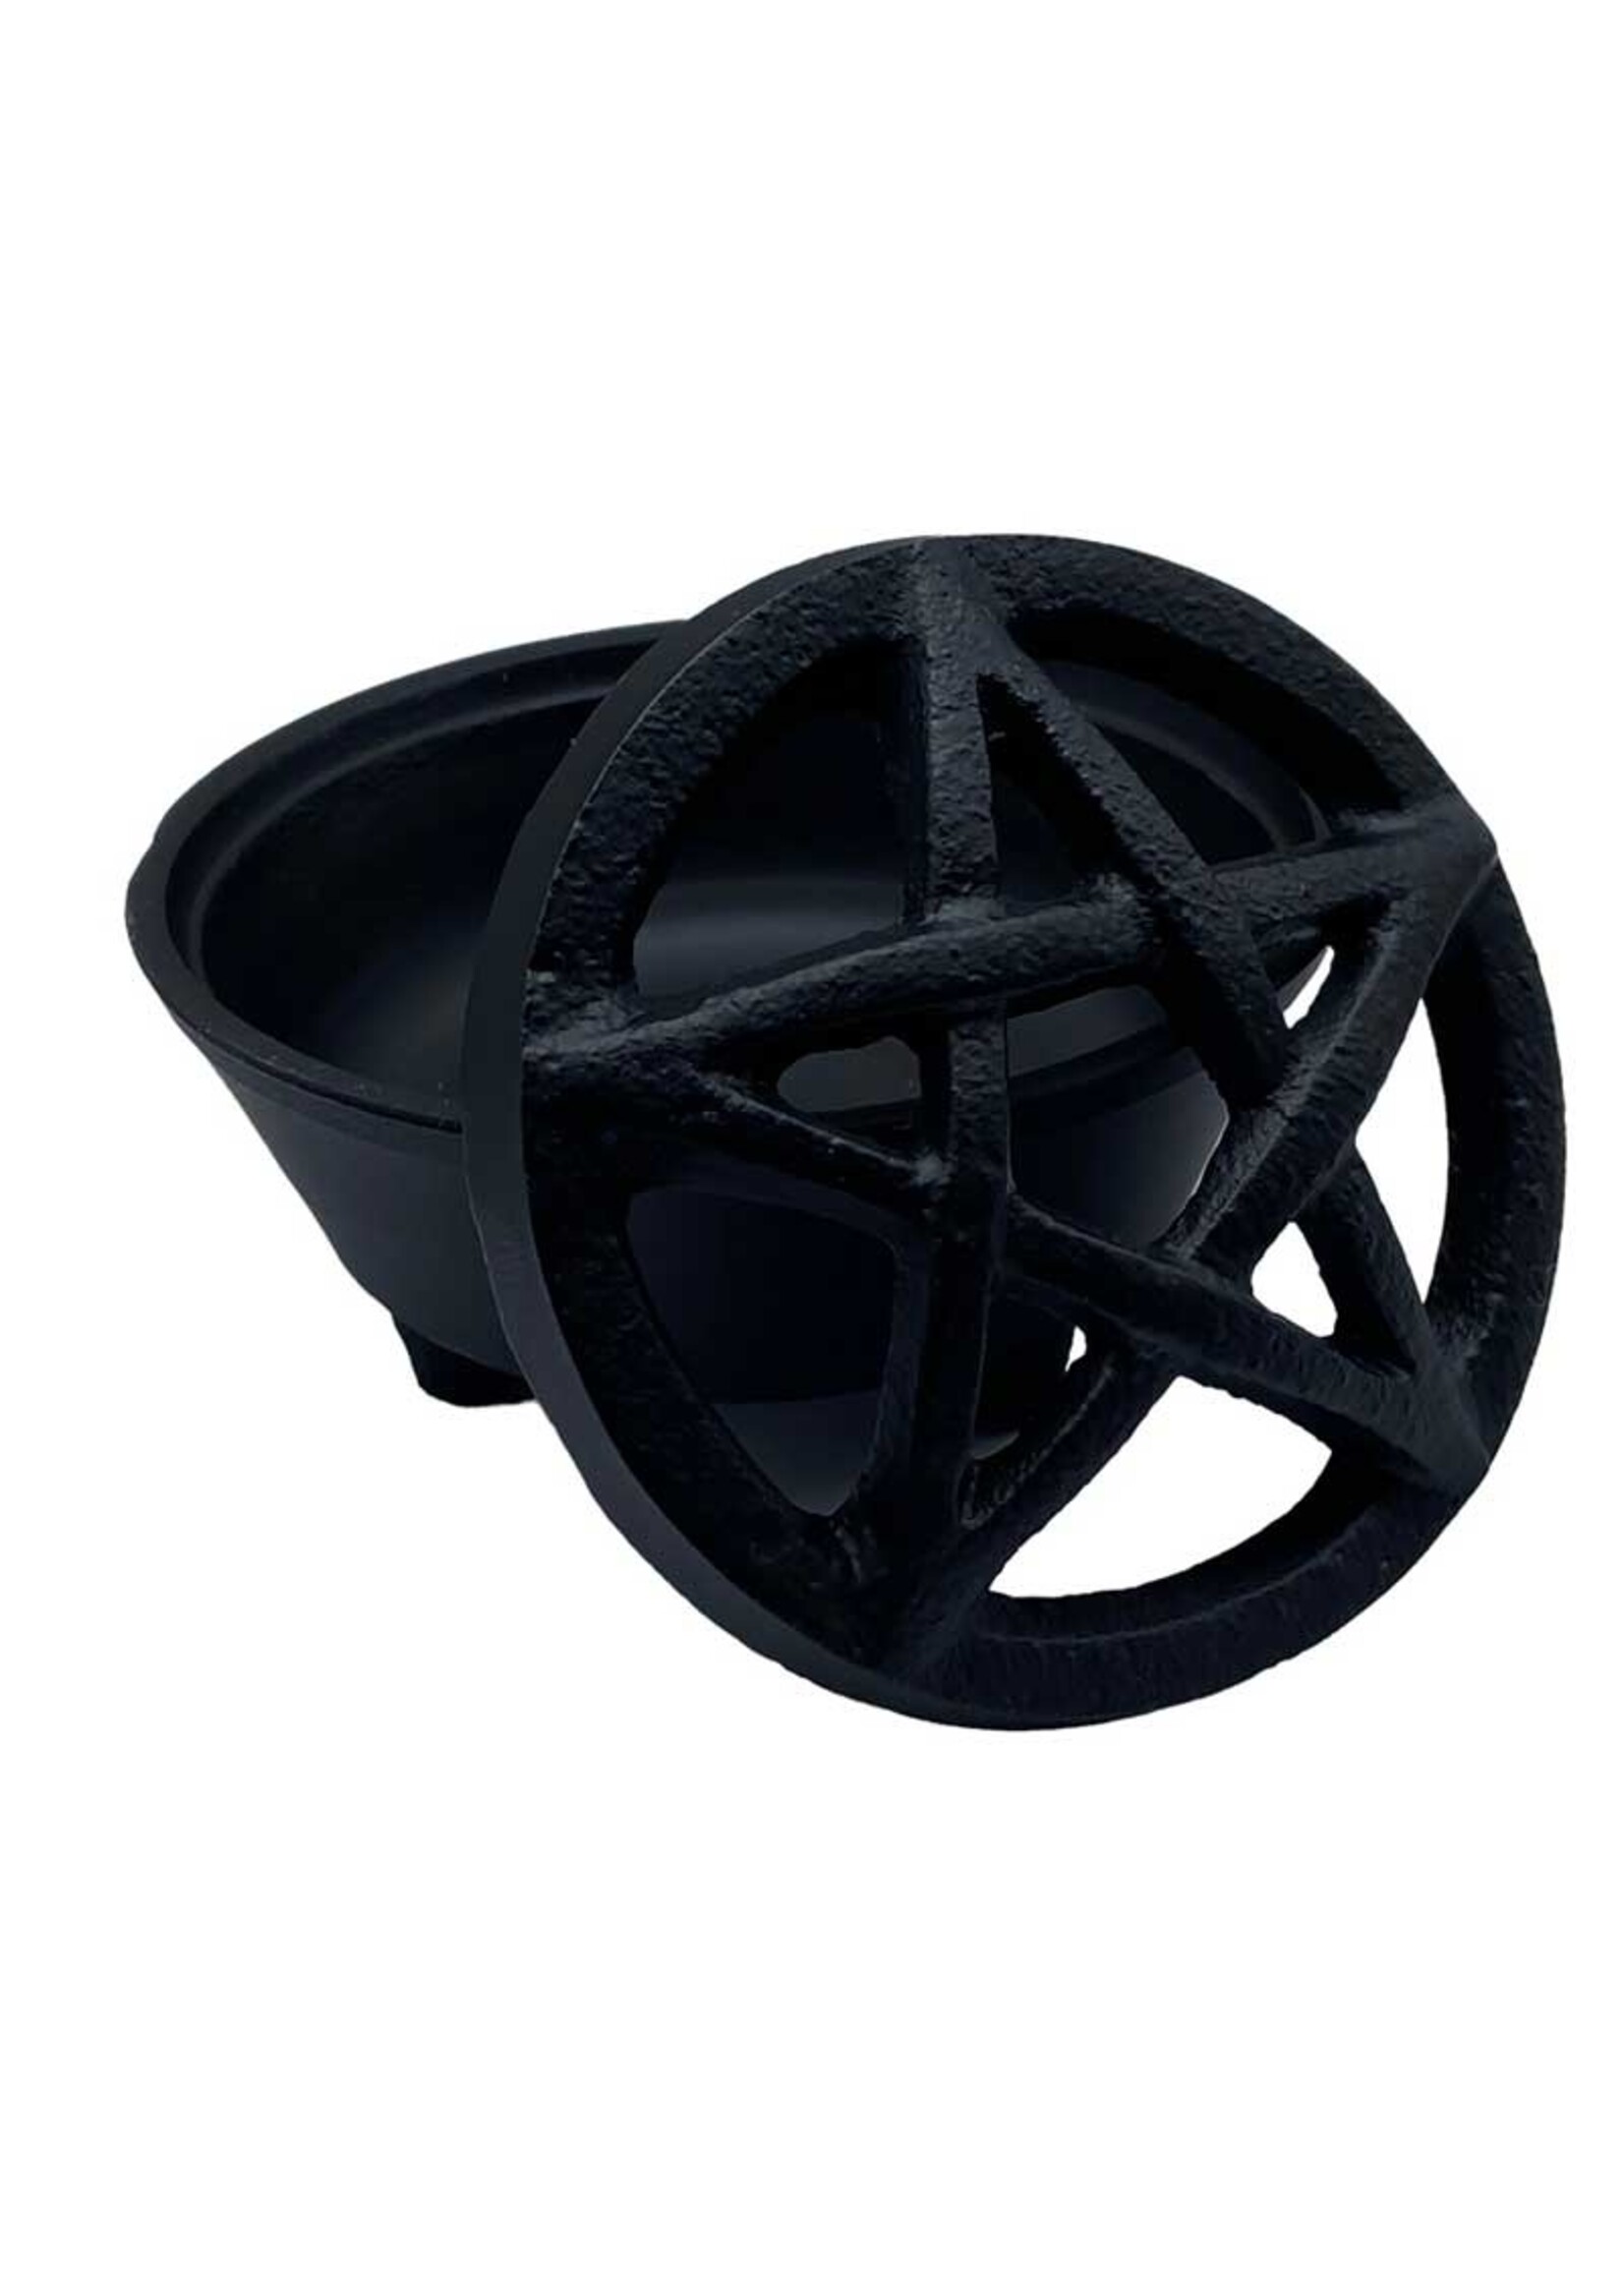 Cast Iron Incense Holder with Pentacle Removable Top